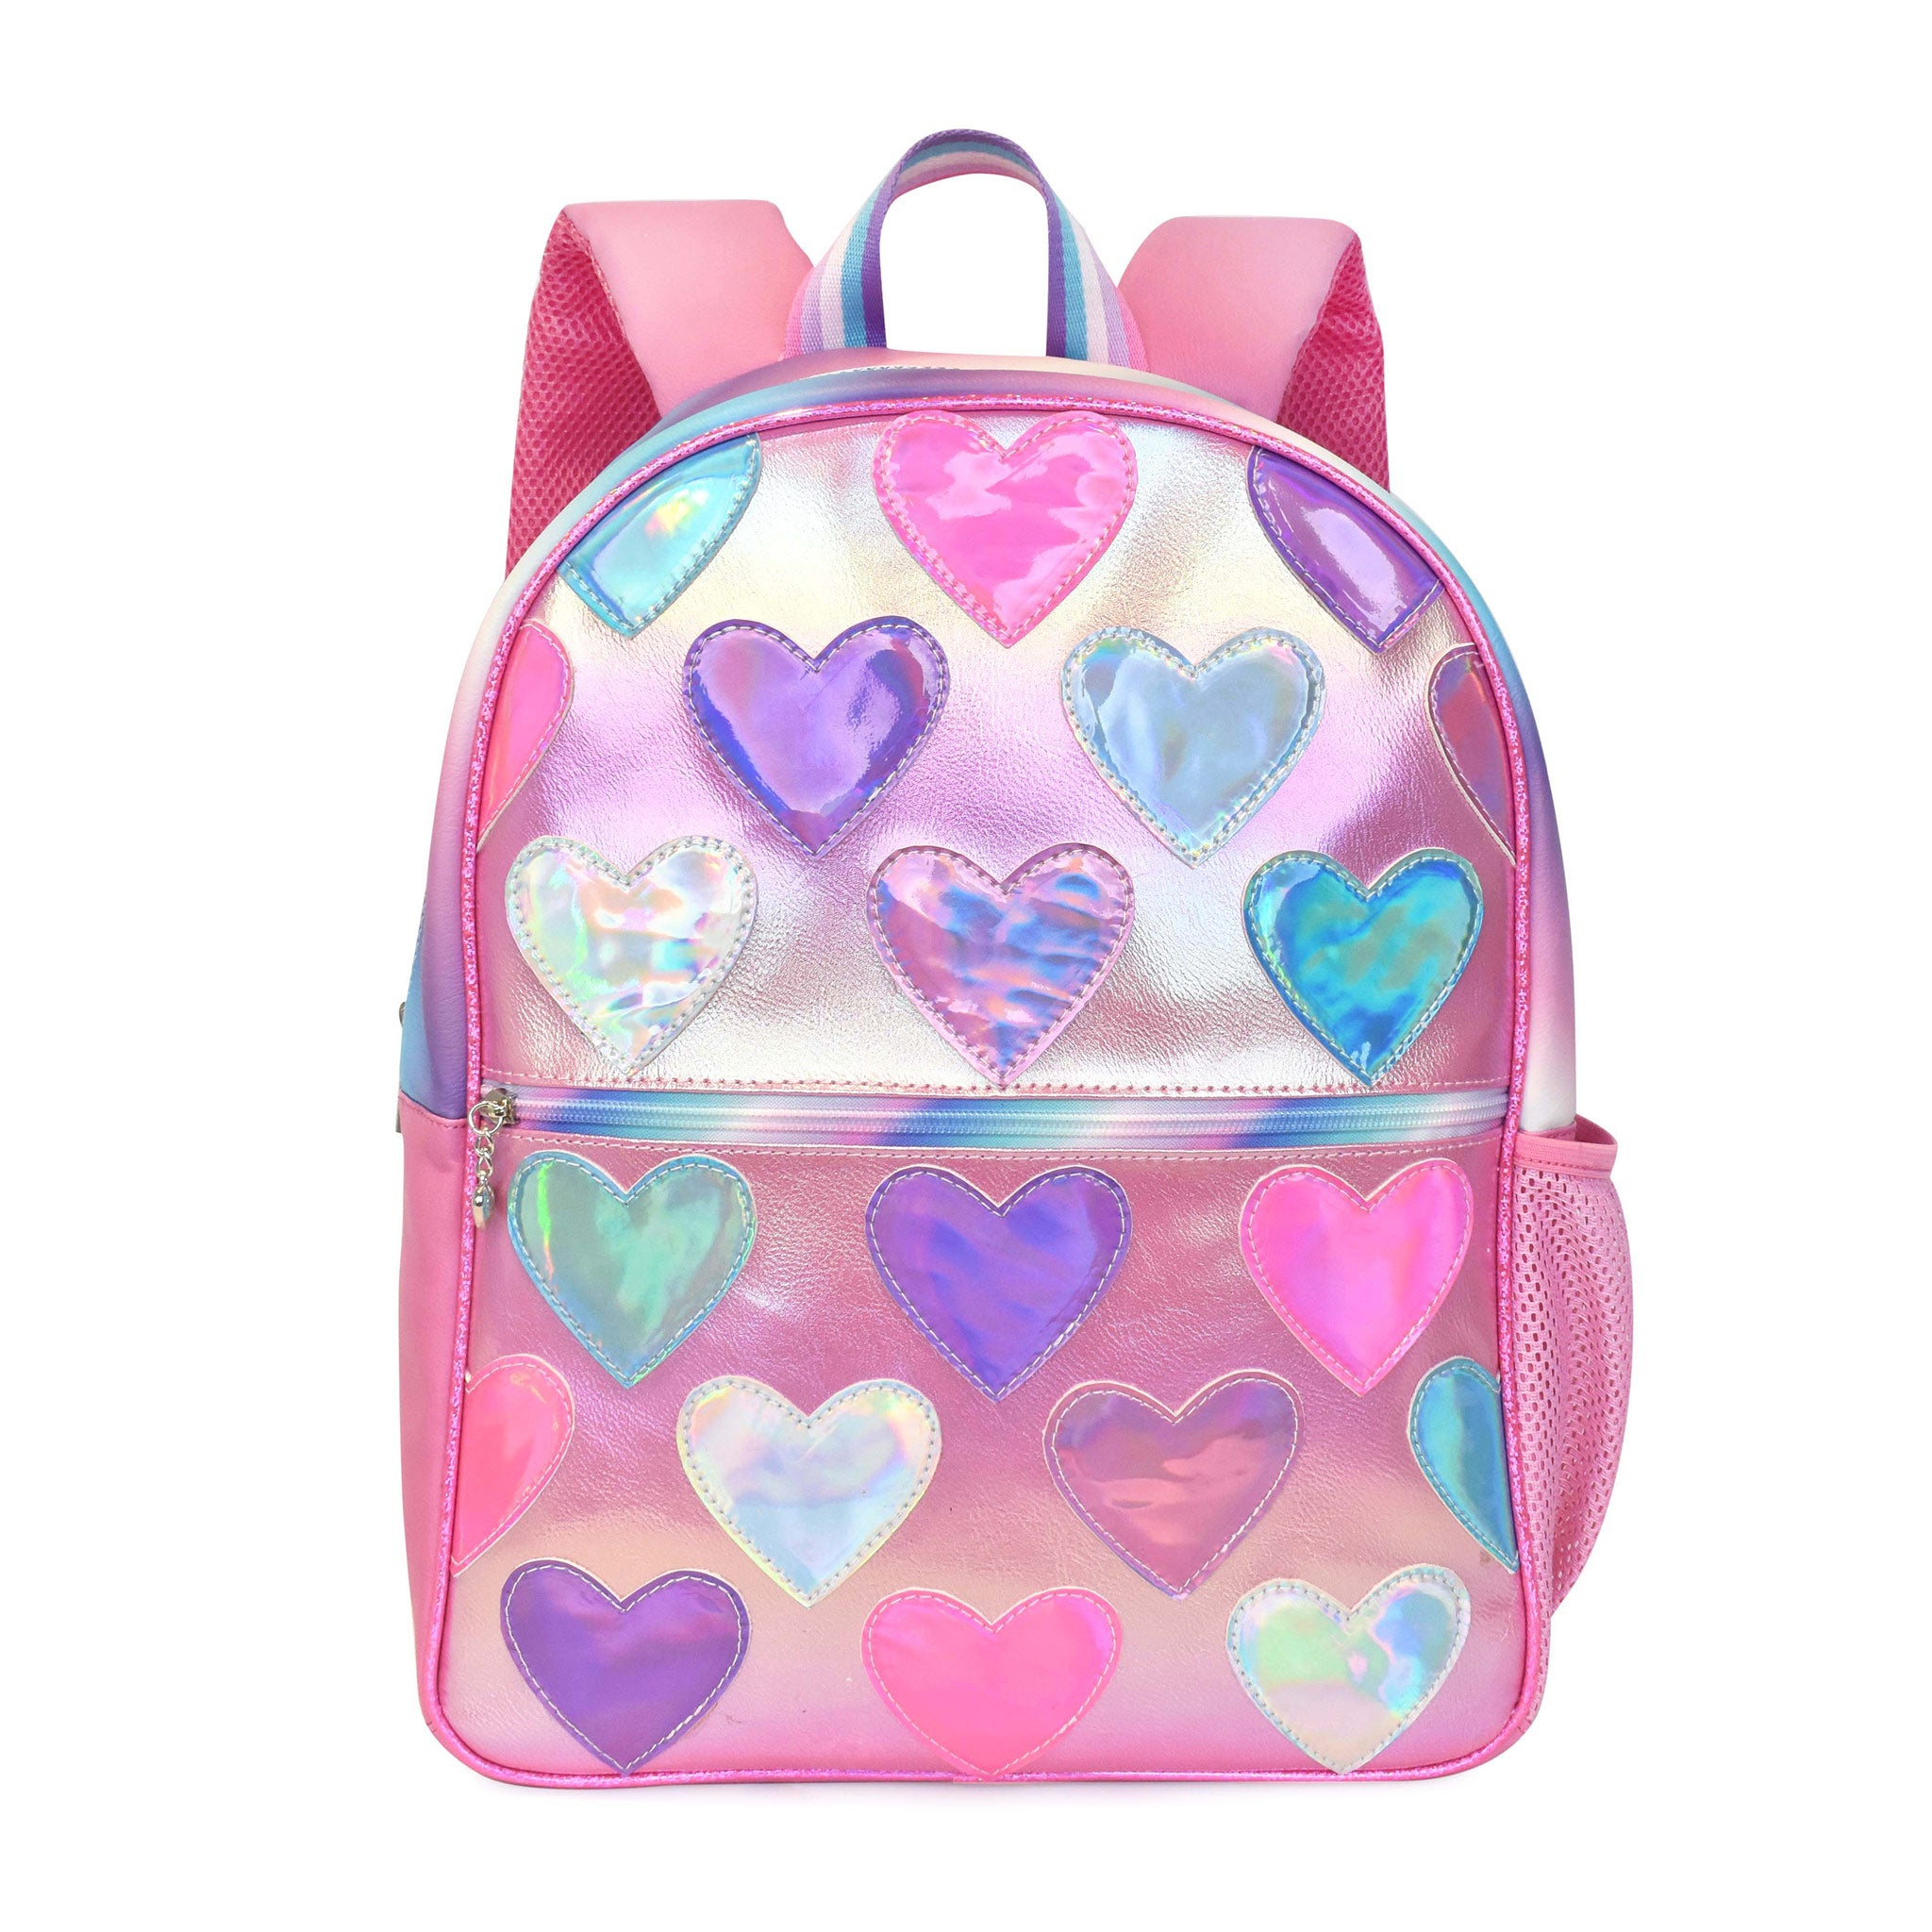 Front view of a metallic heart-patched large backpack